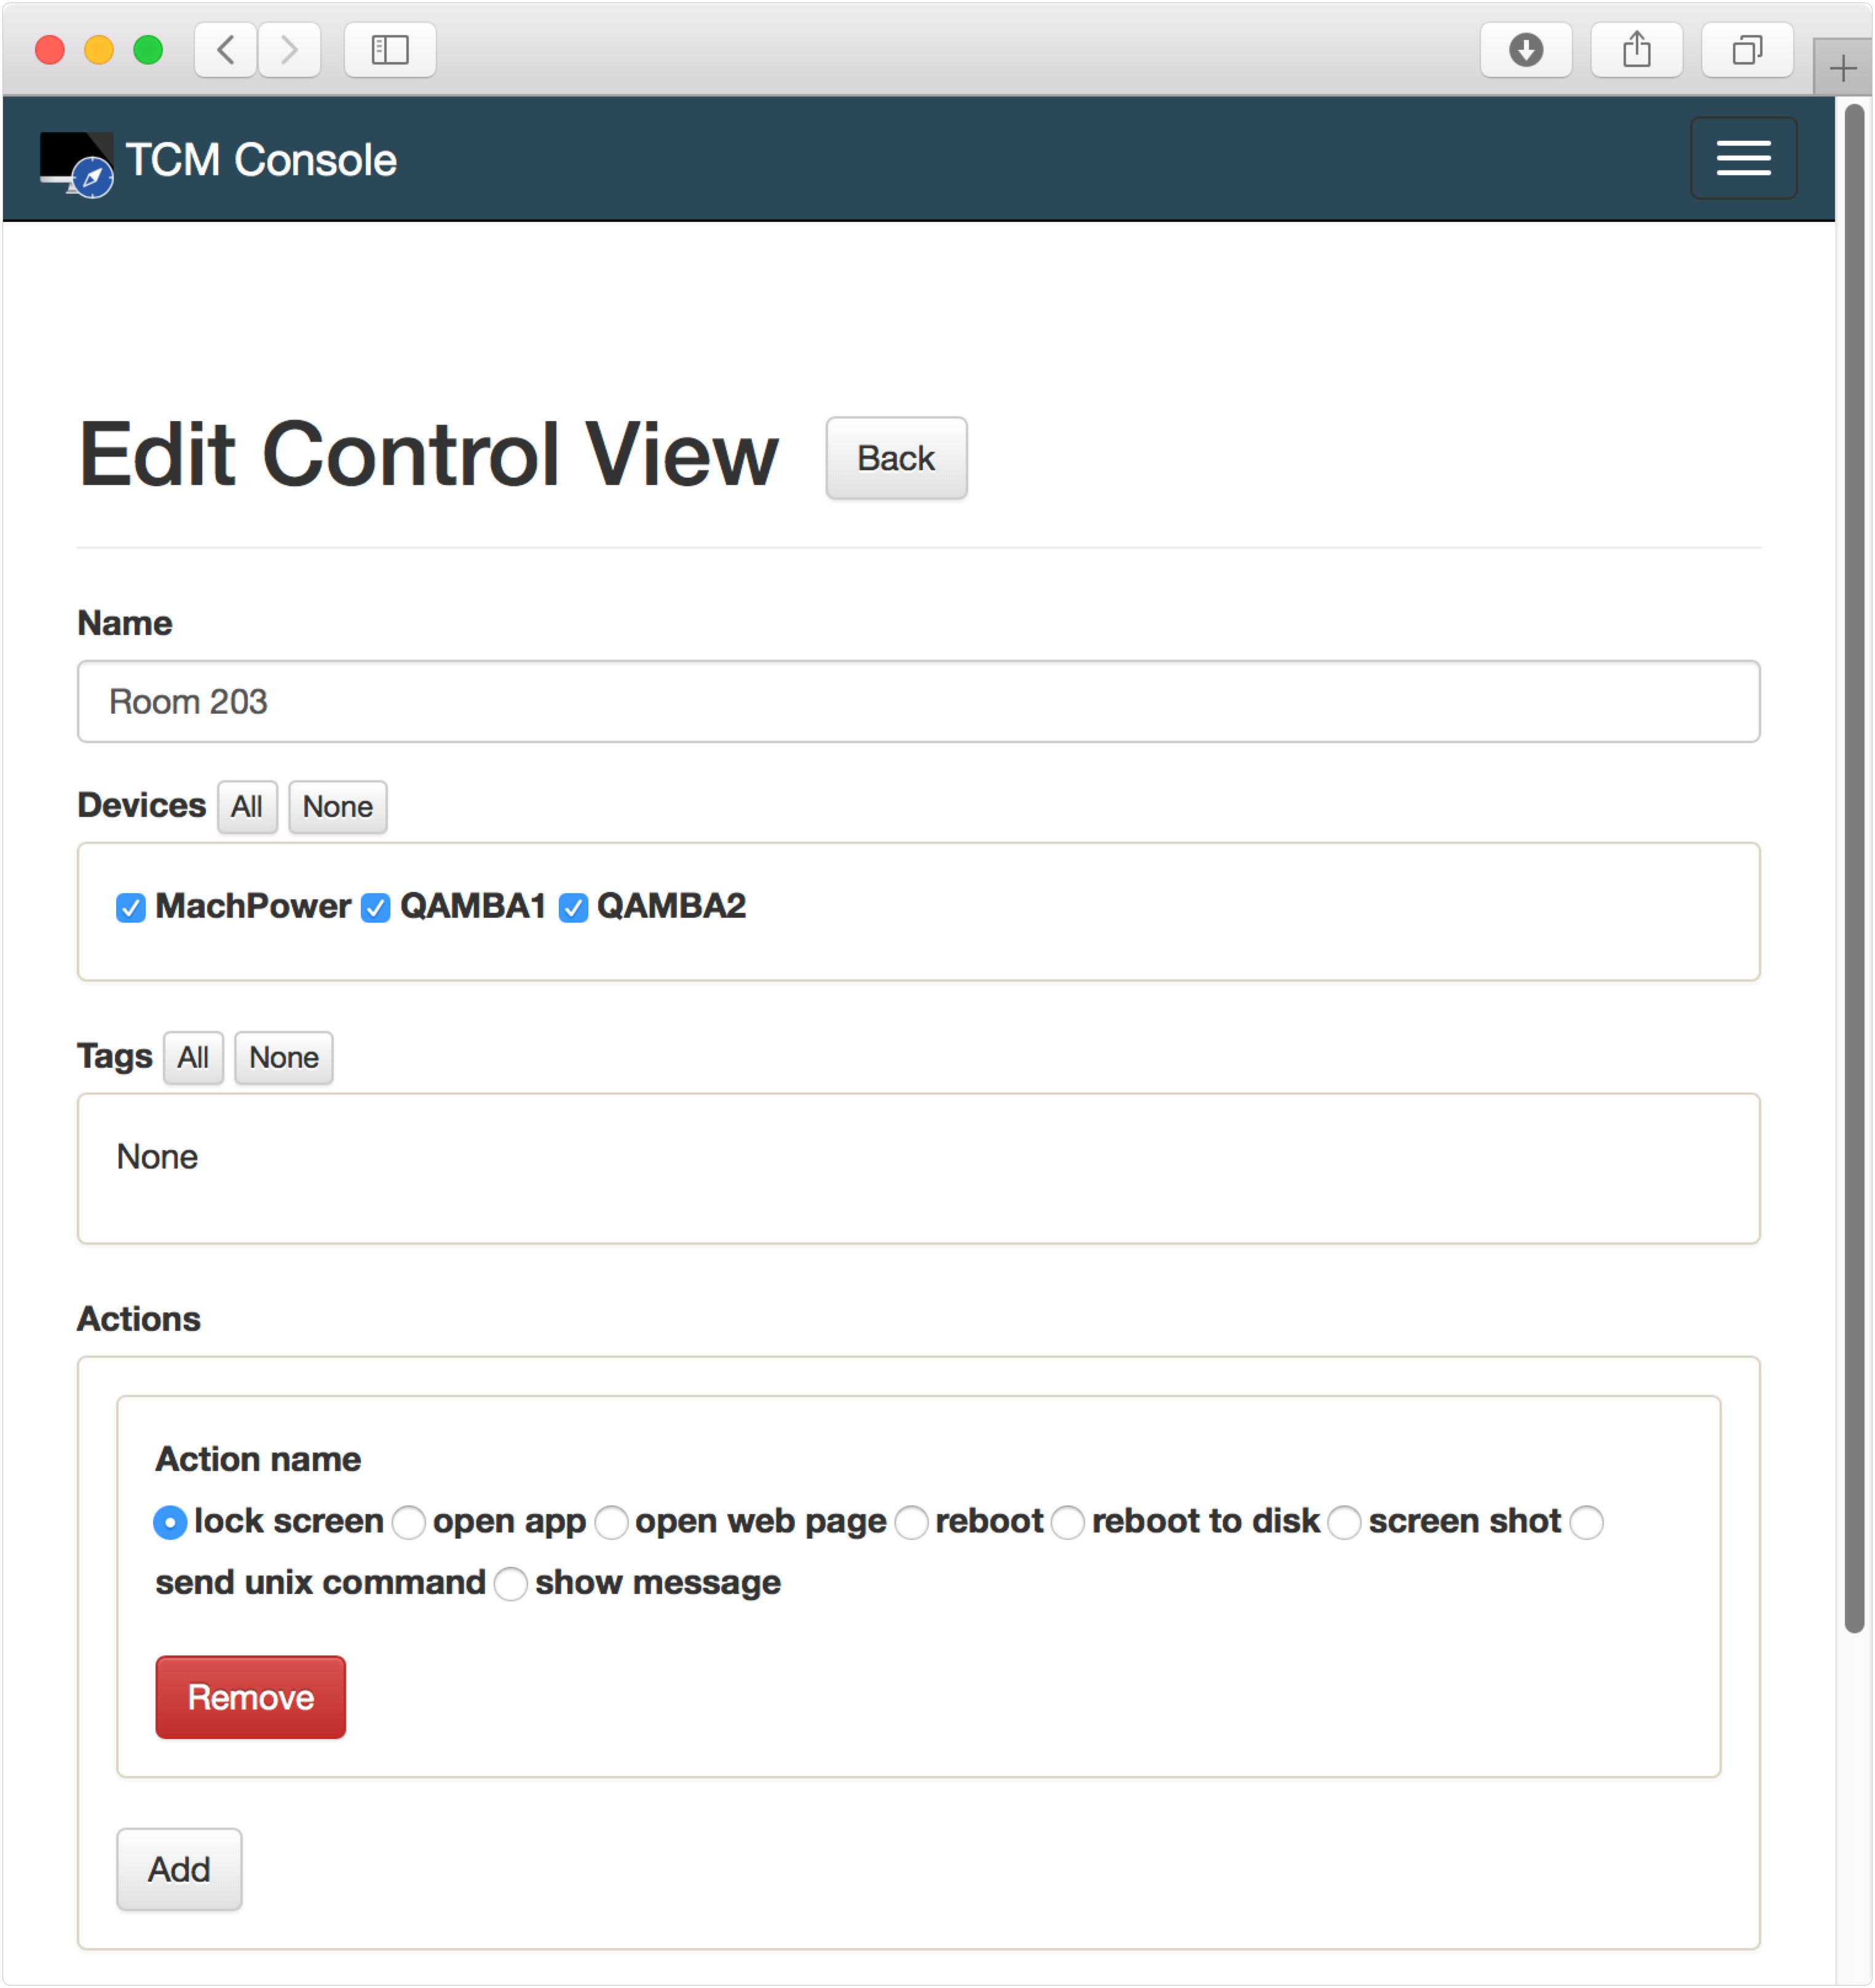 Configuring a Control View